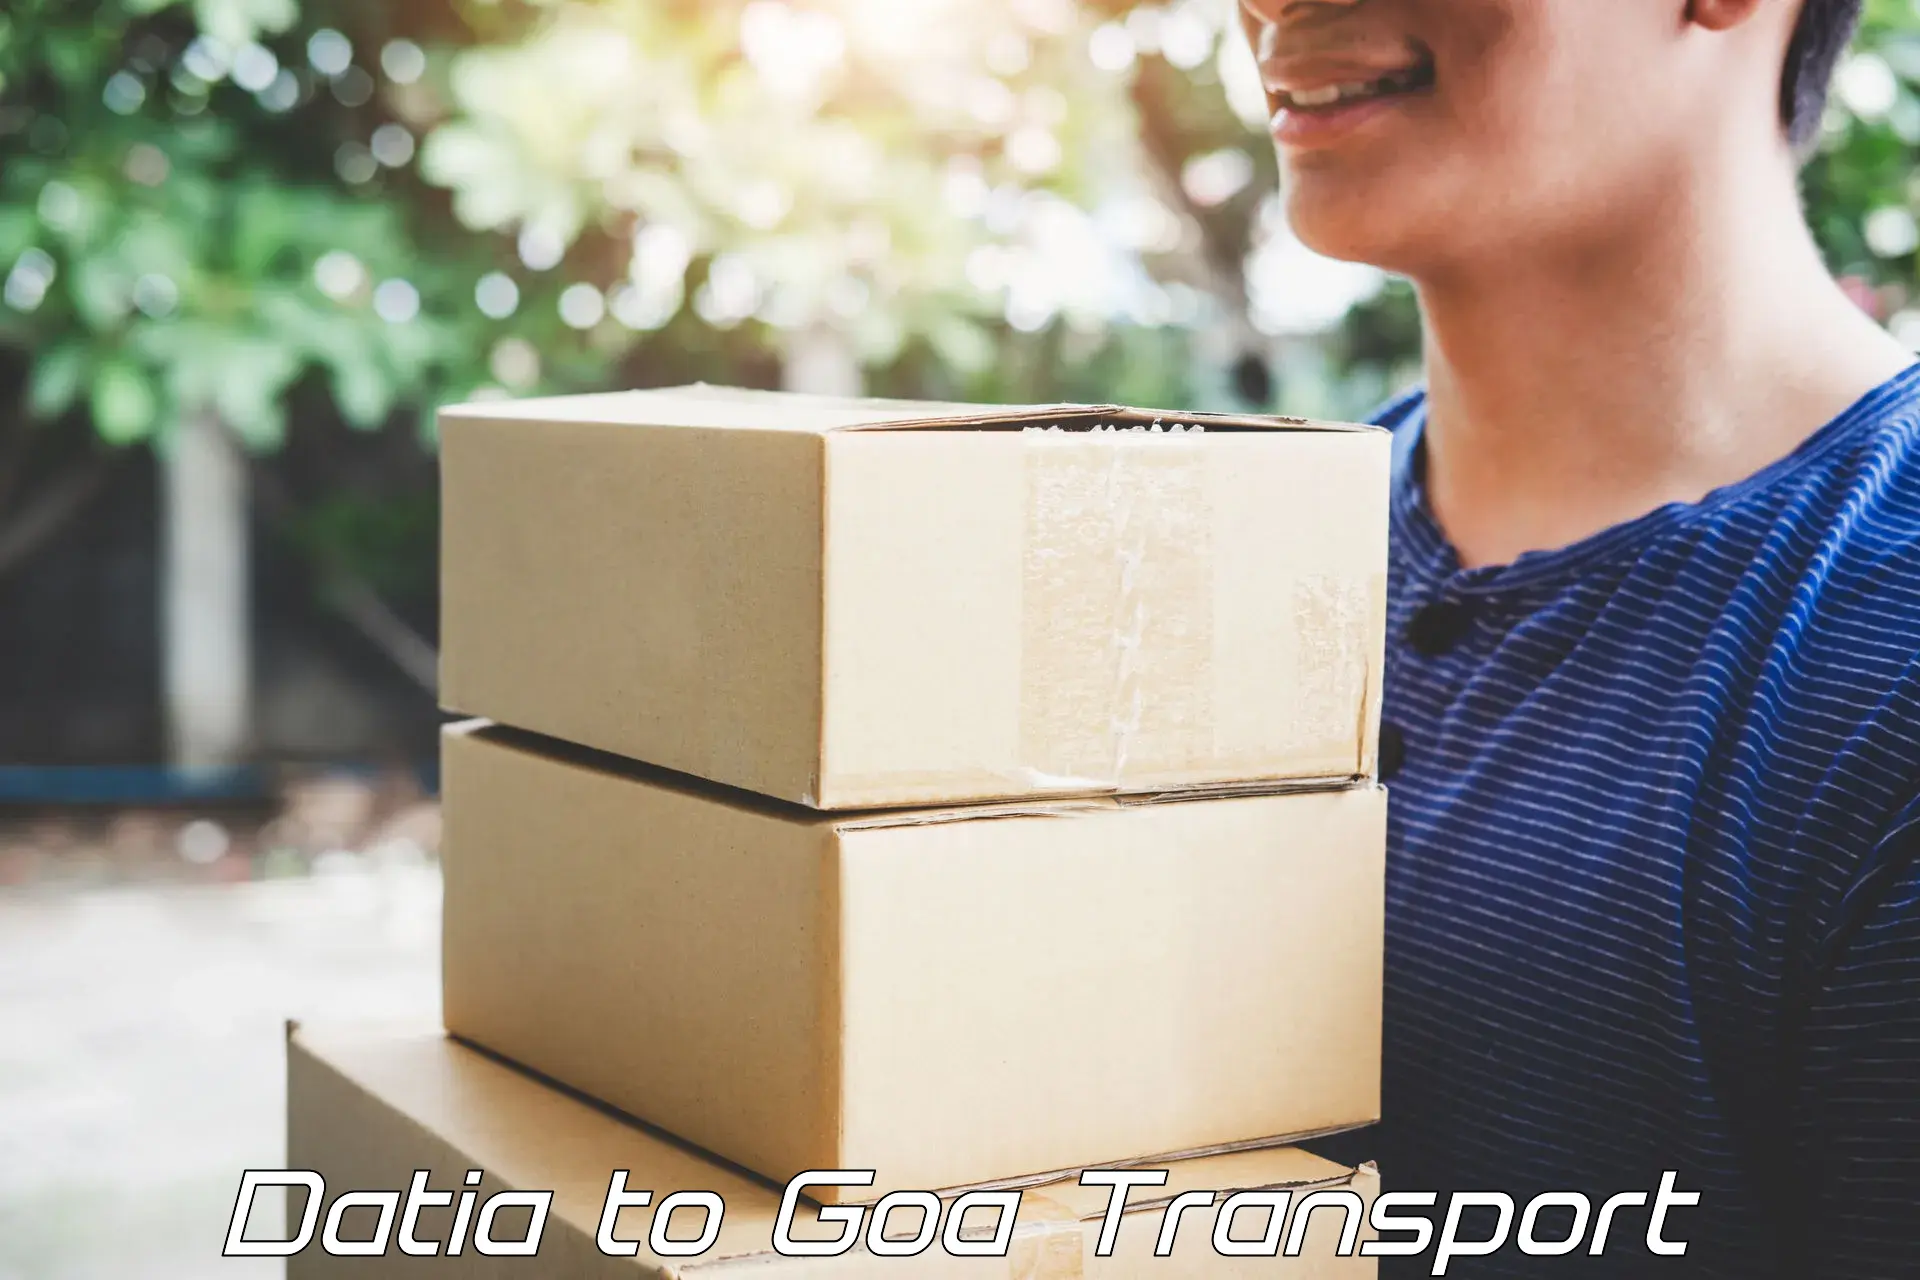 Container transport service Datia to South Goa